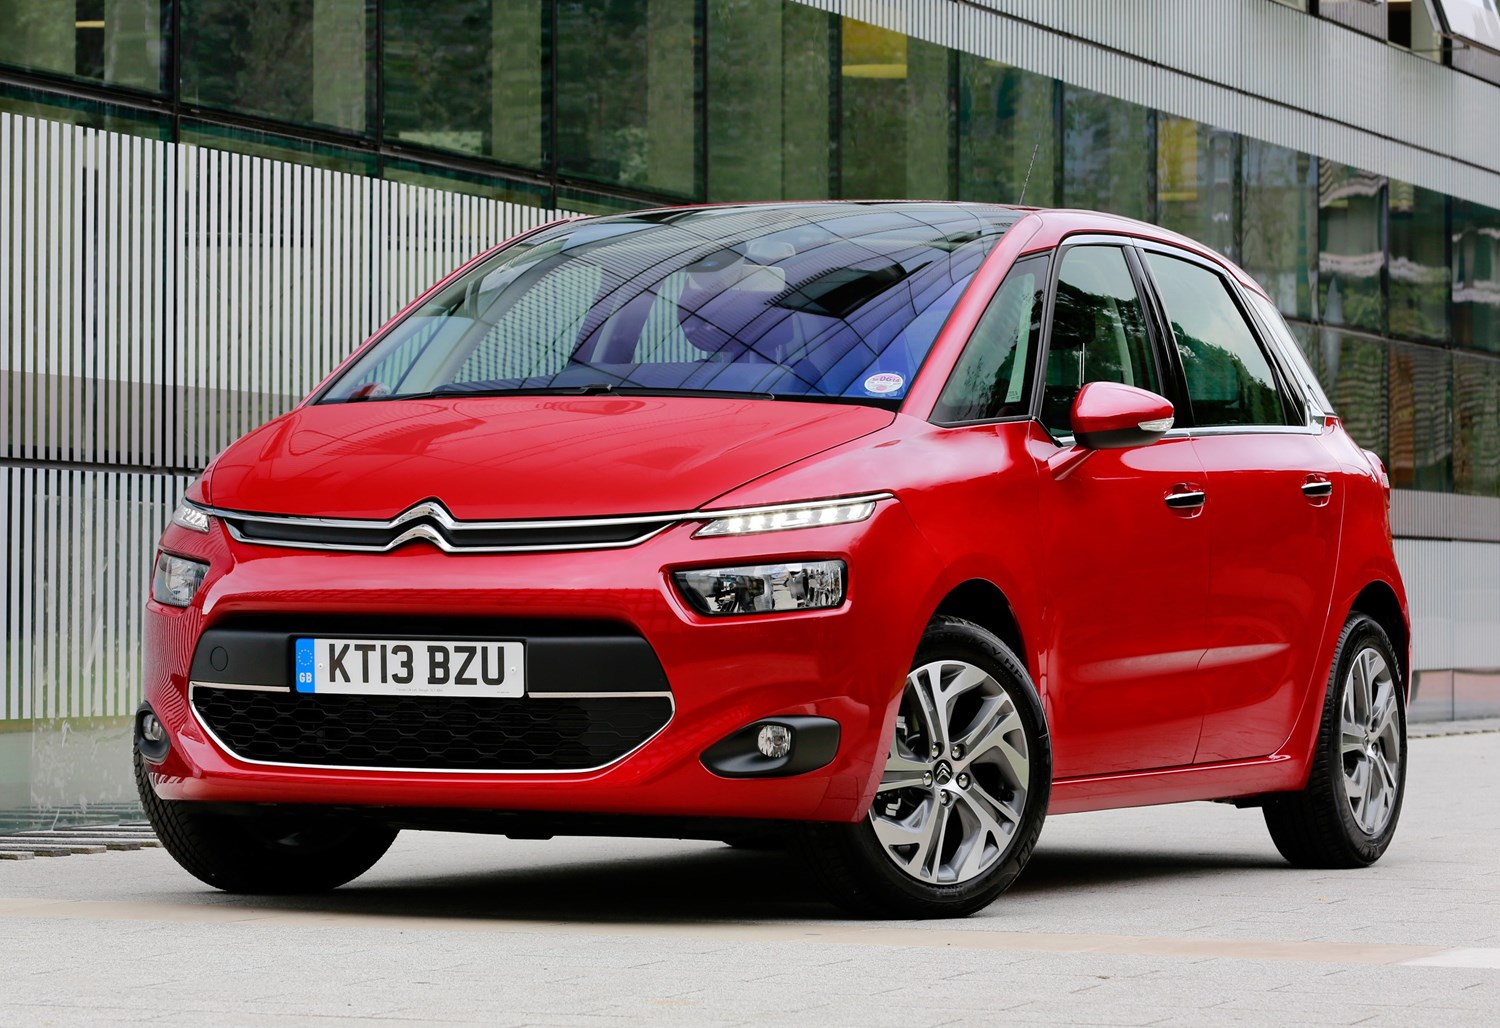 Citroen C4 Picasso (2013) first official pictures